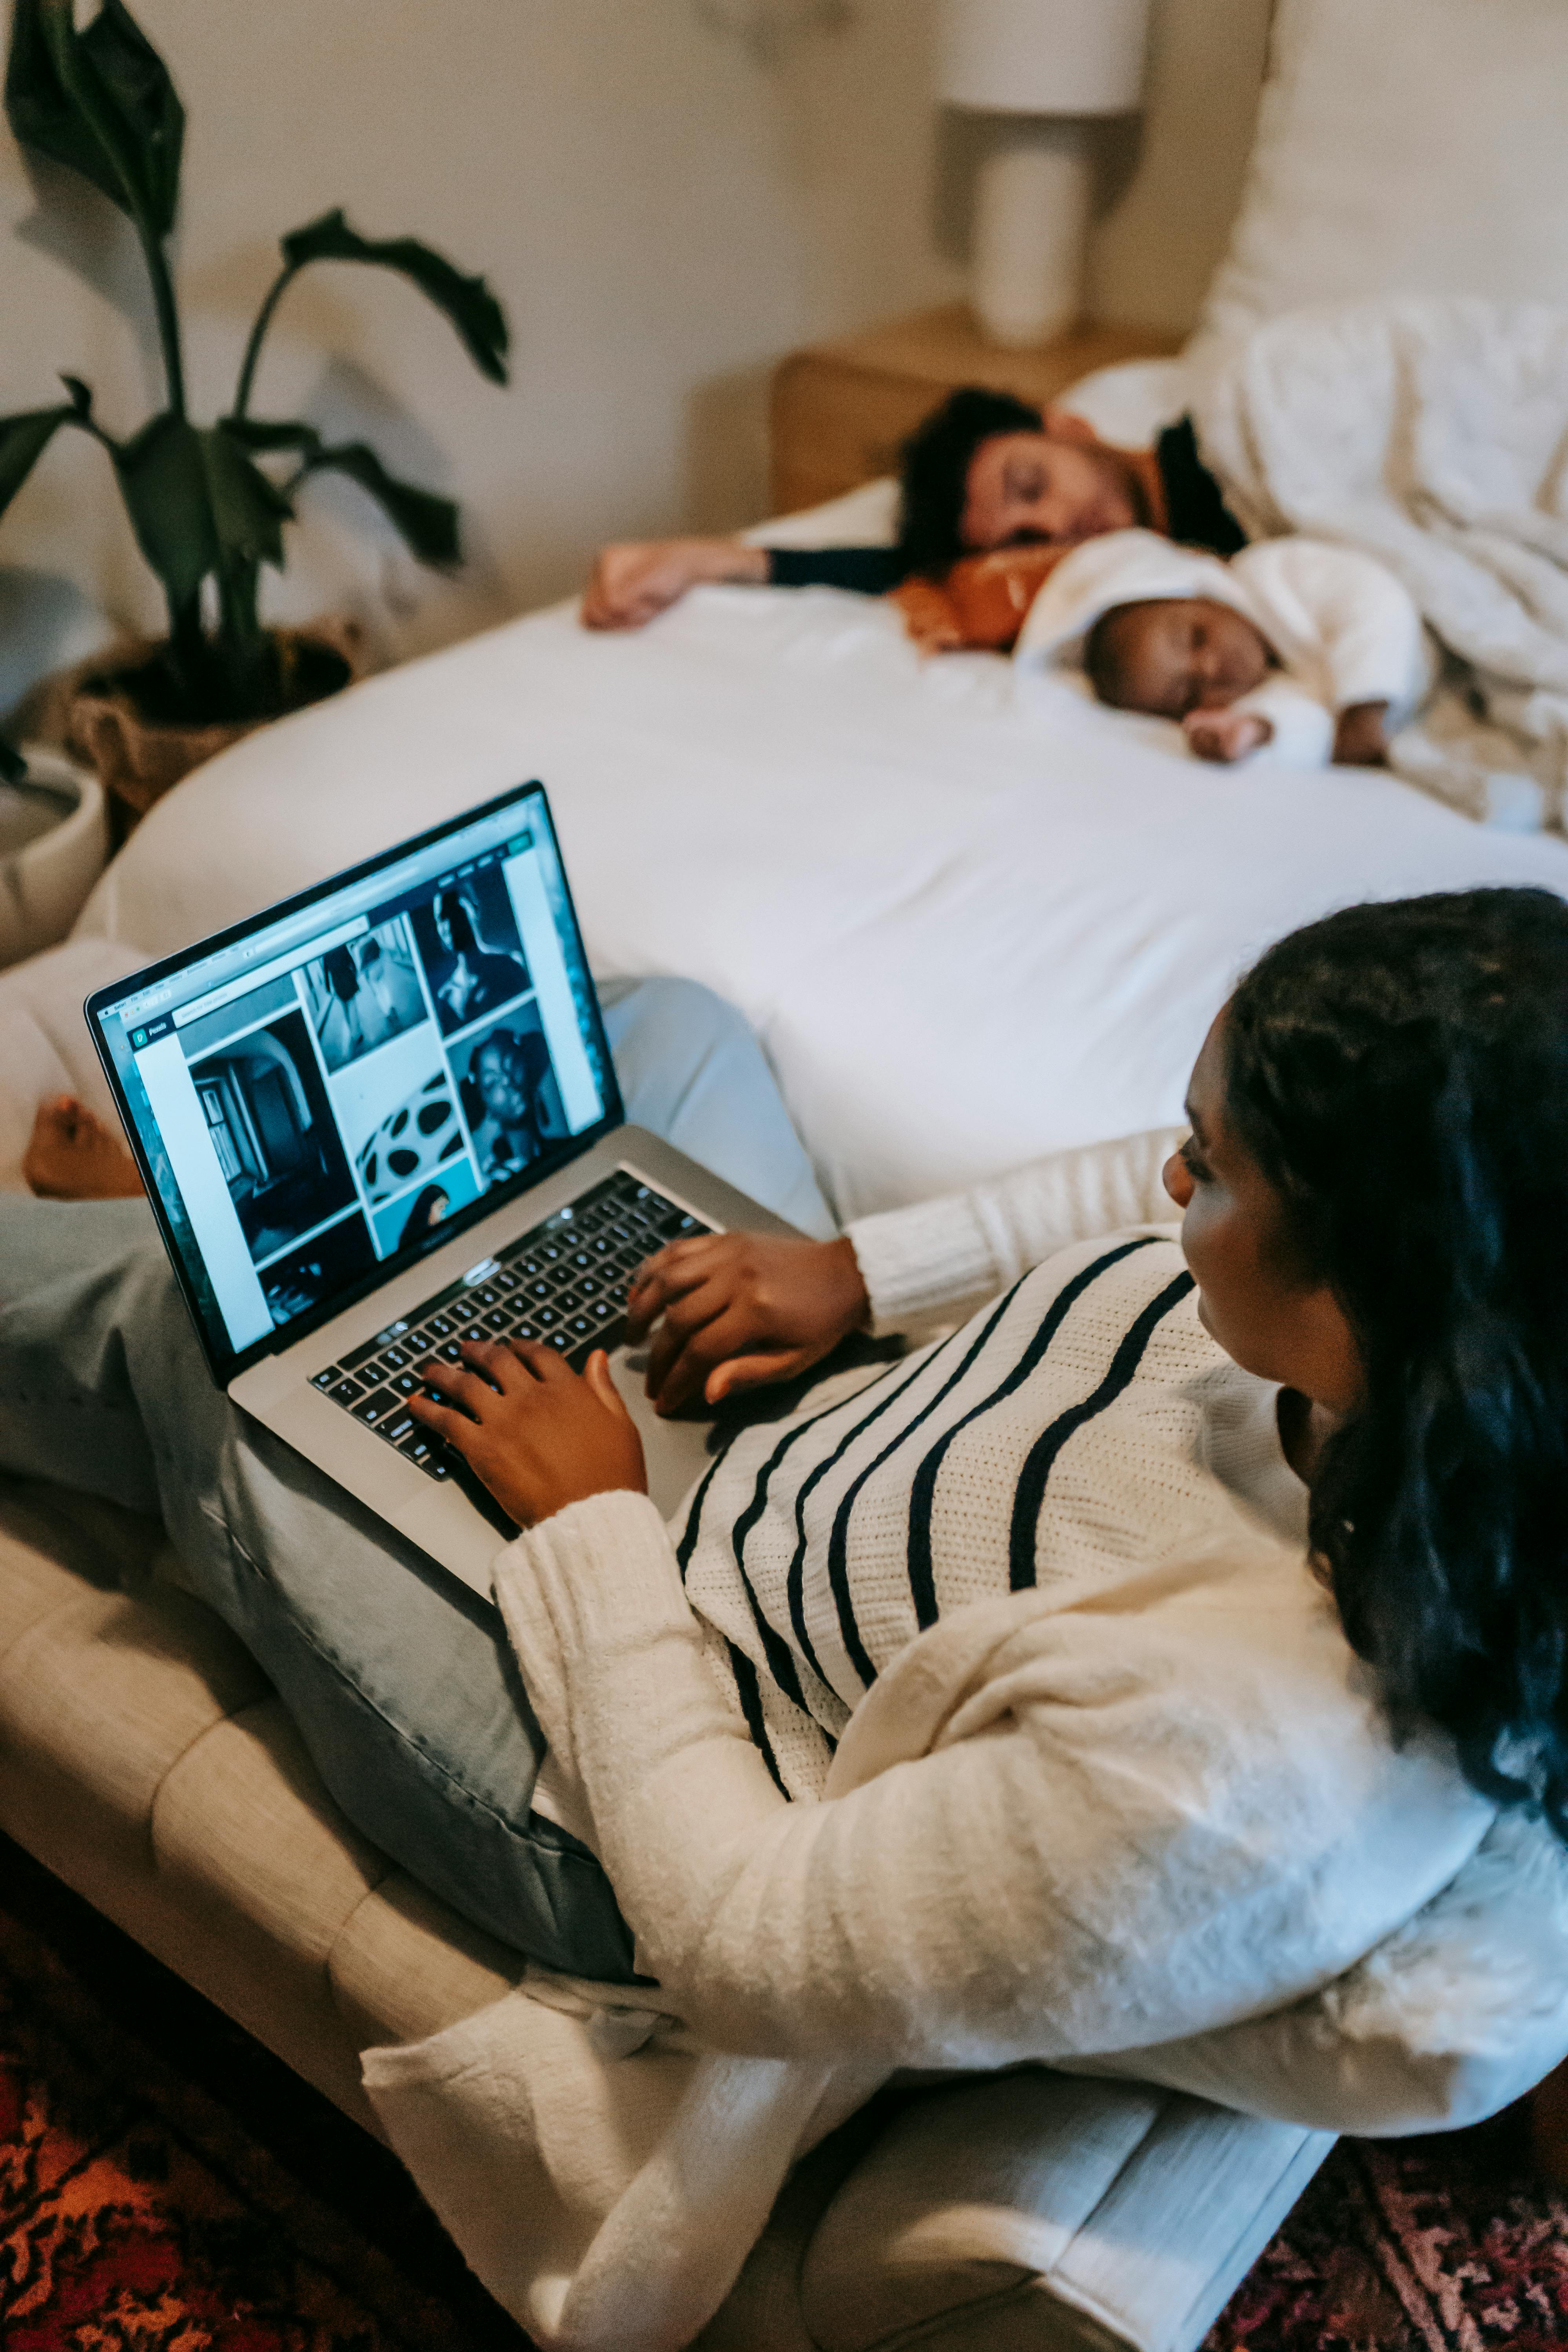 A woman on her laptop and her family sleeping on the bed | Source: Pexels